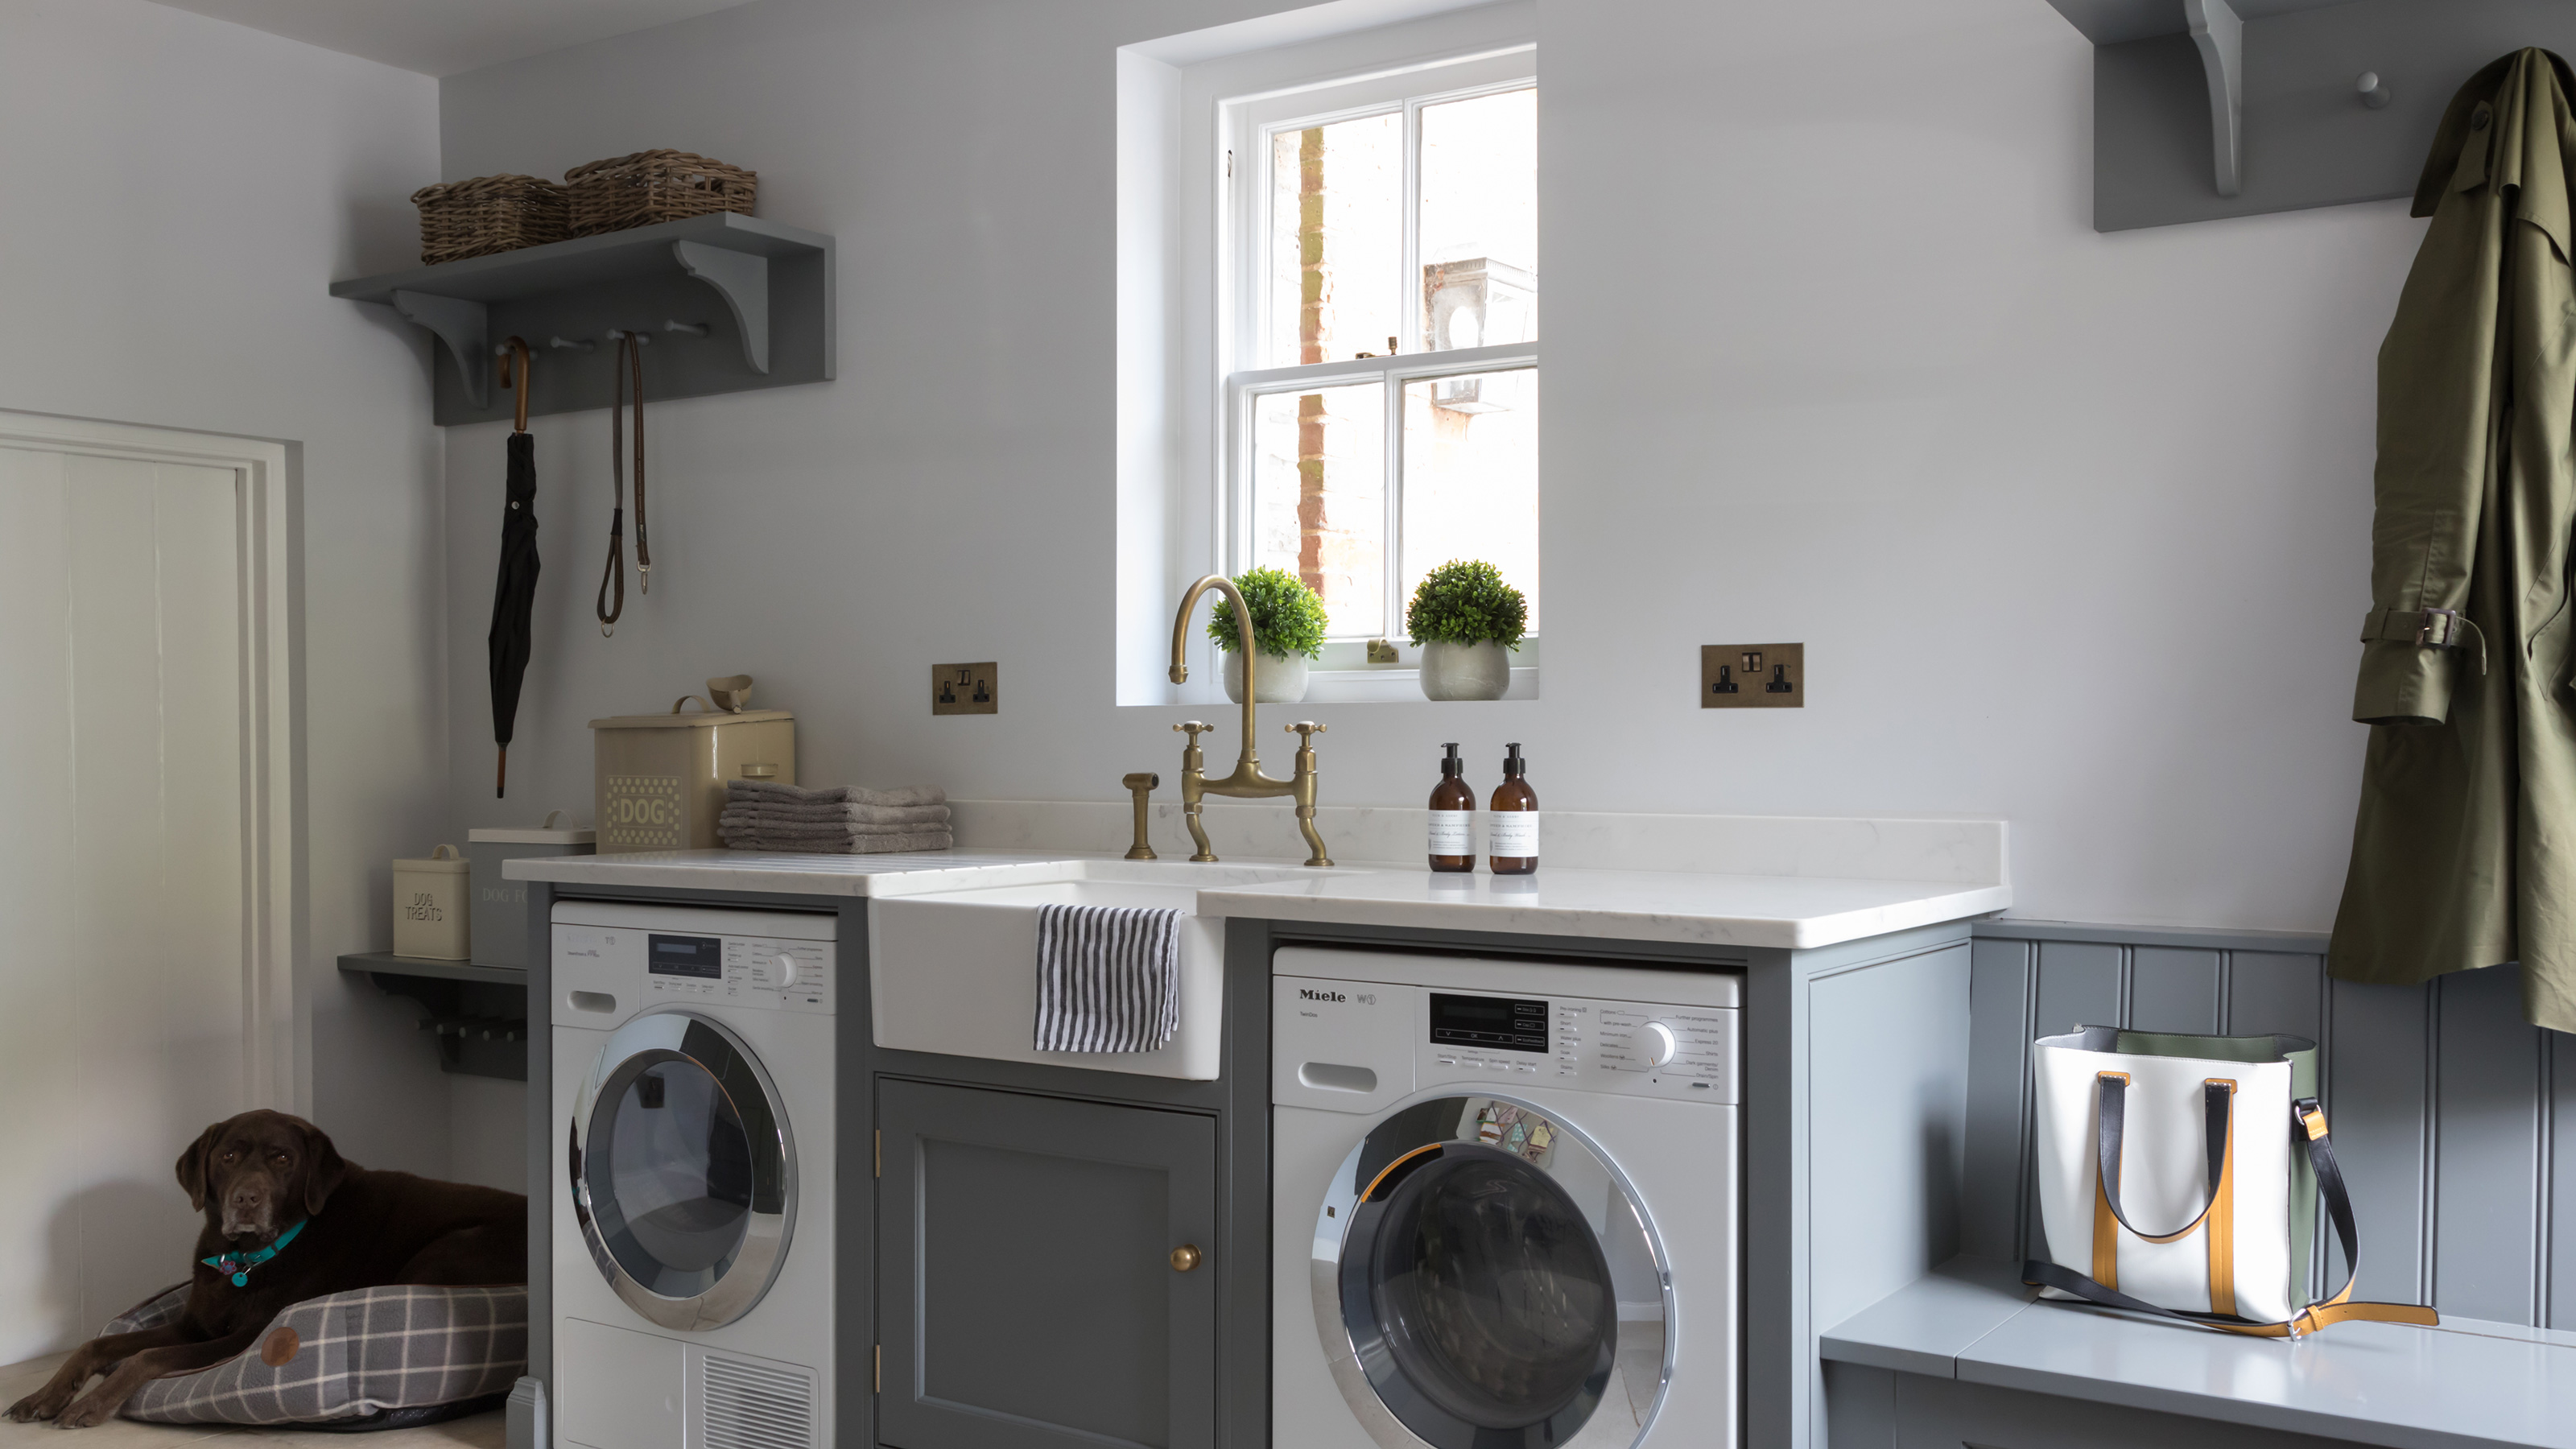 Clever Storage Ideas Make This Laundry Room Multifunctional